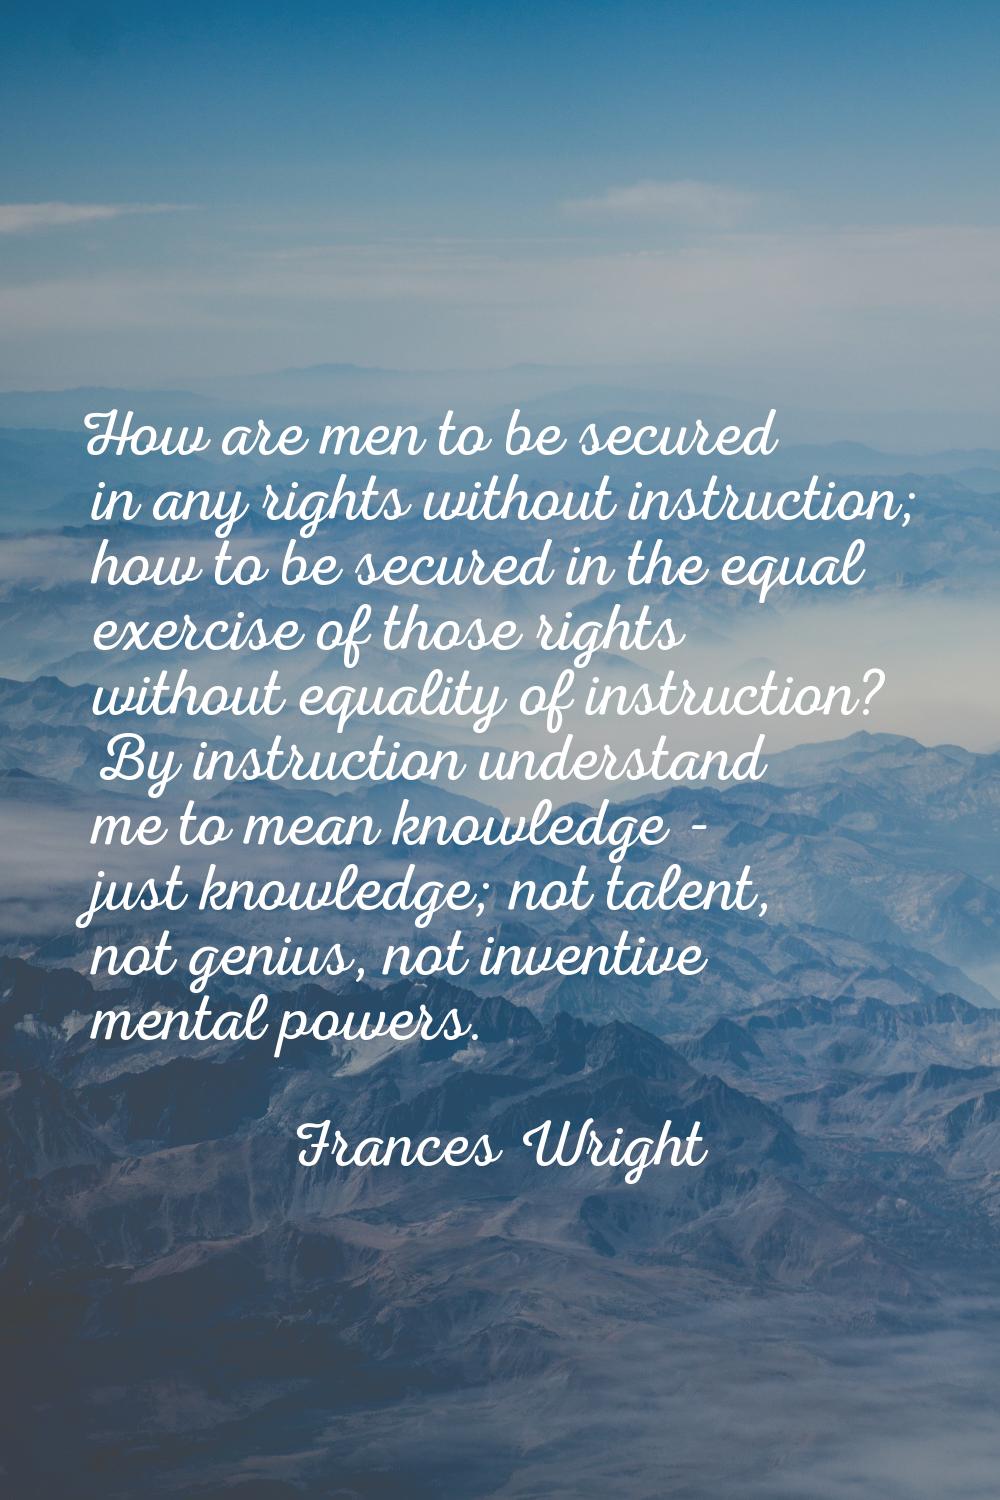 How are men to be secured in any rights without instruction; how to be secured in the equal exercis